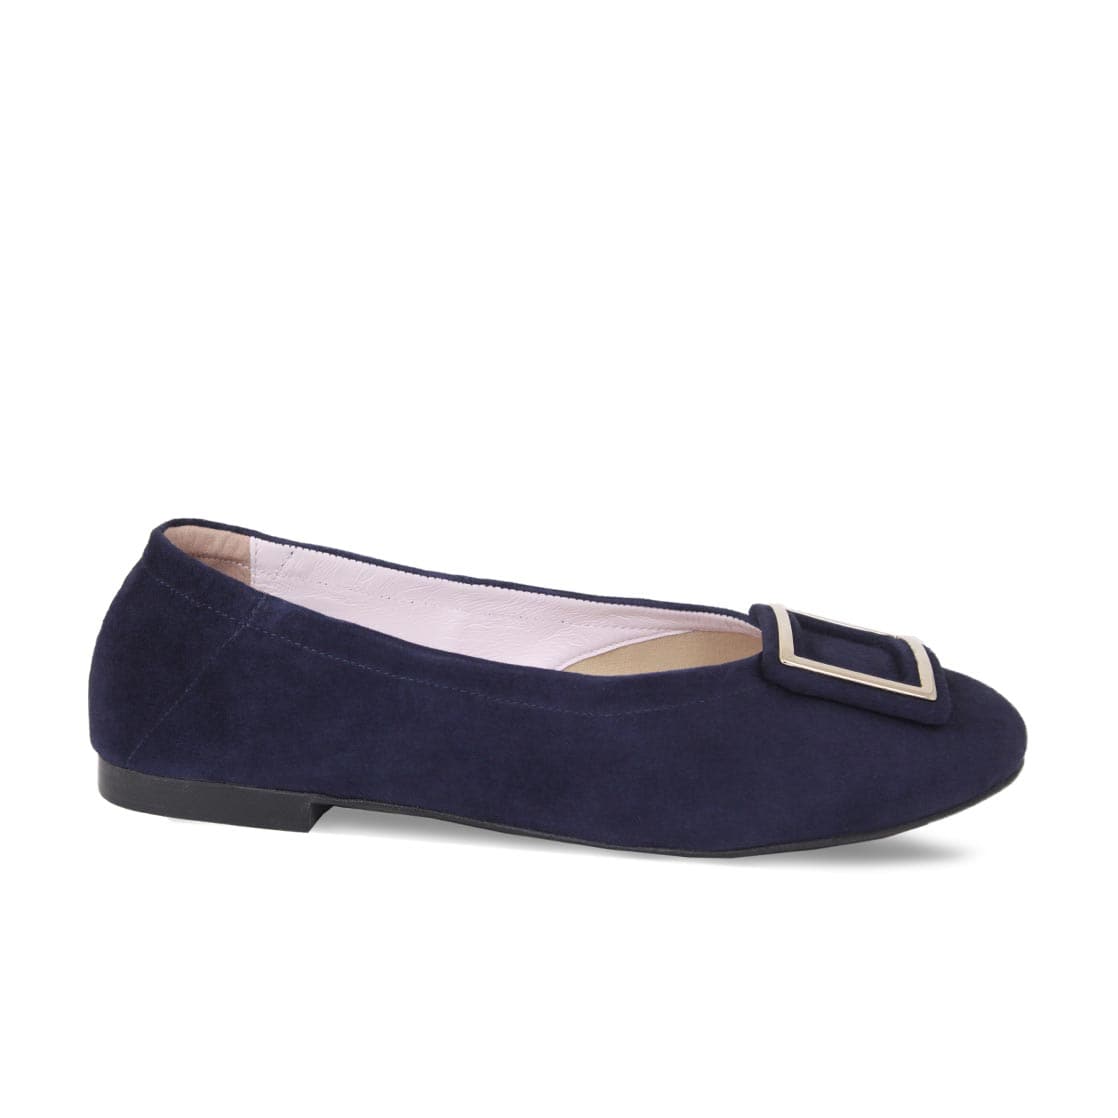 Navy Suede Ballet Flat with Buckle